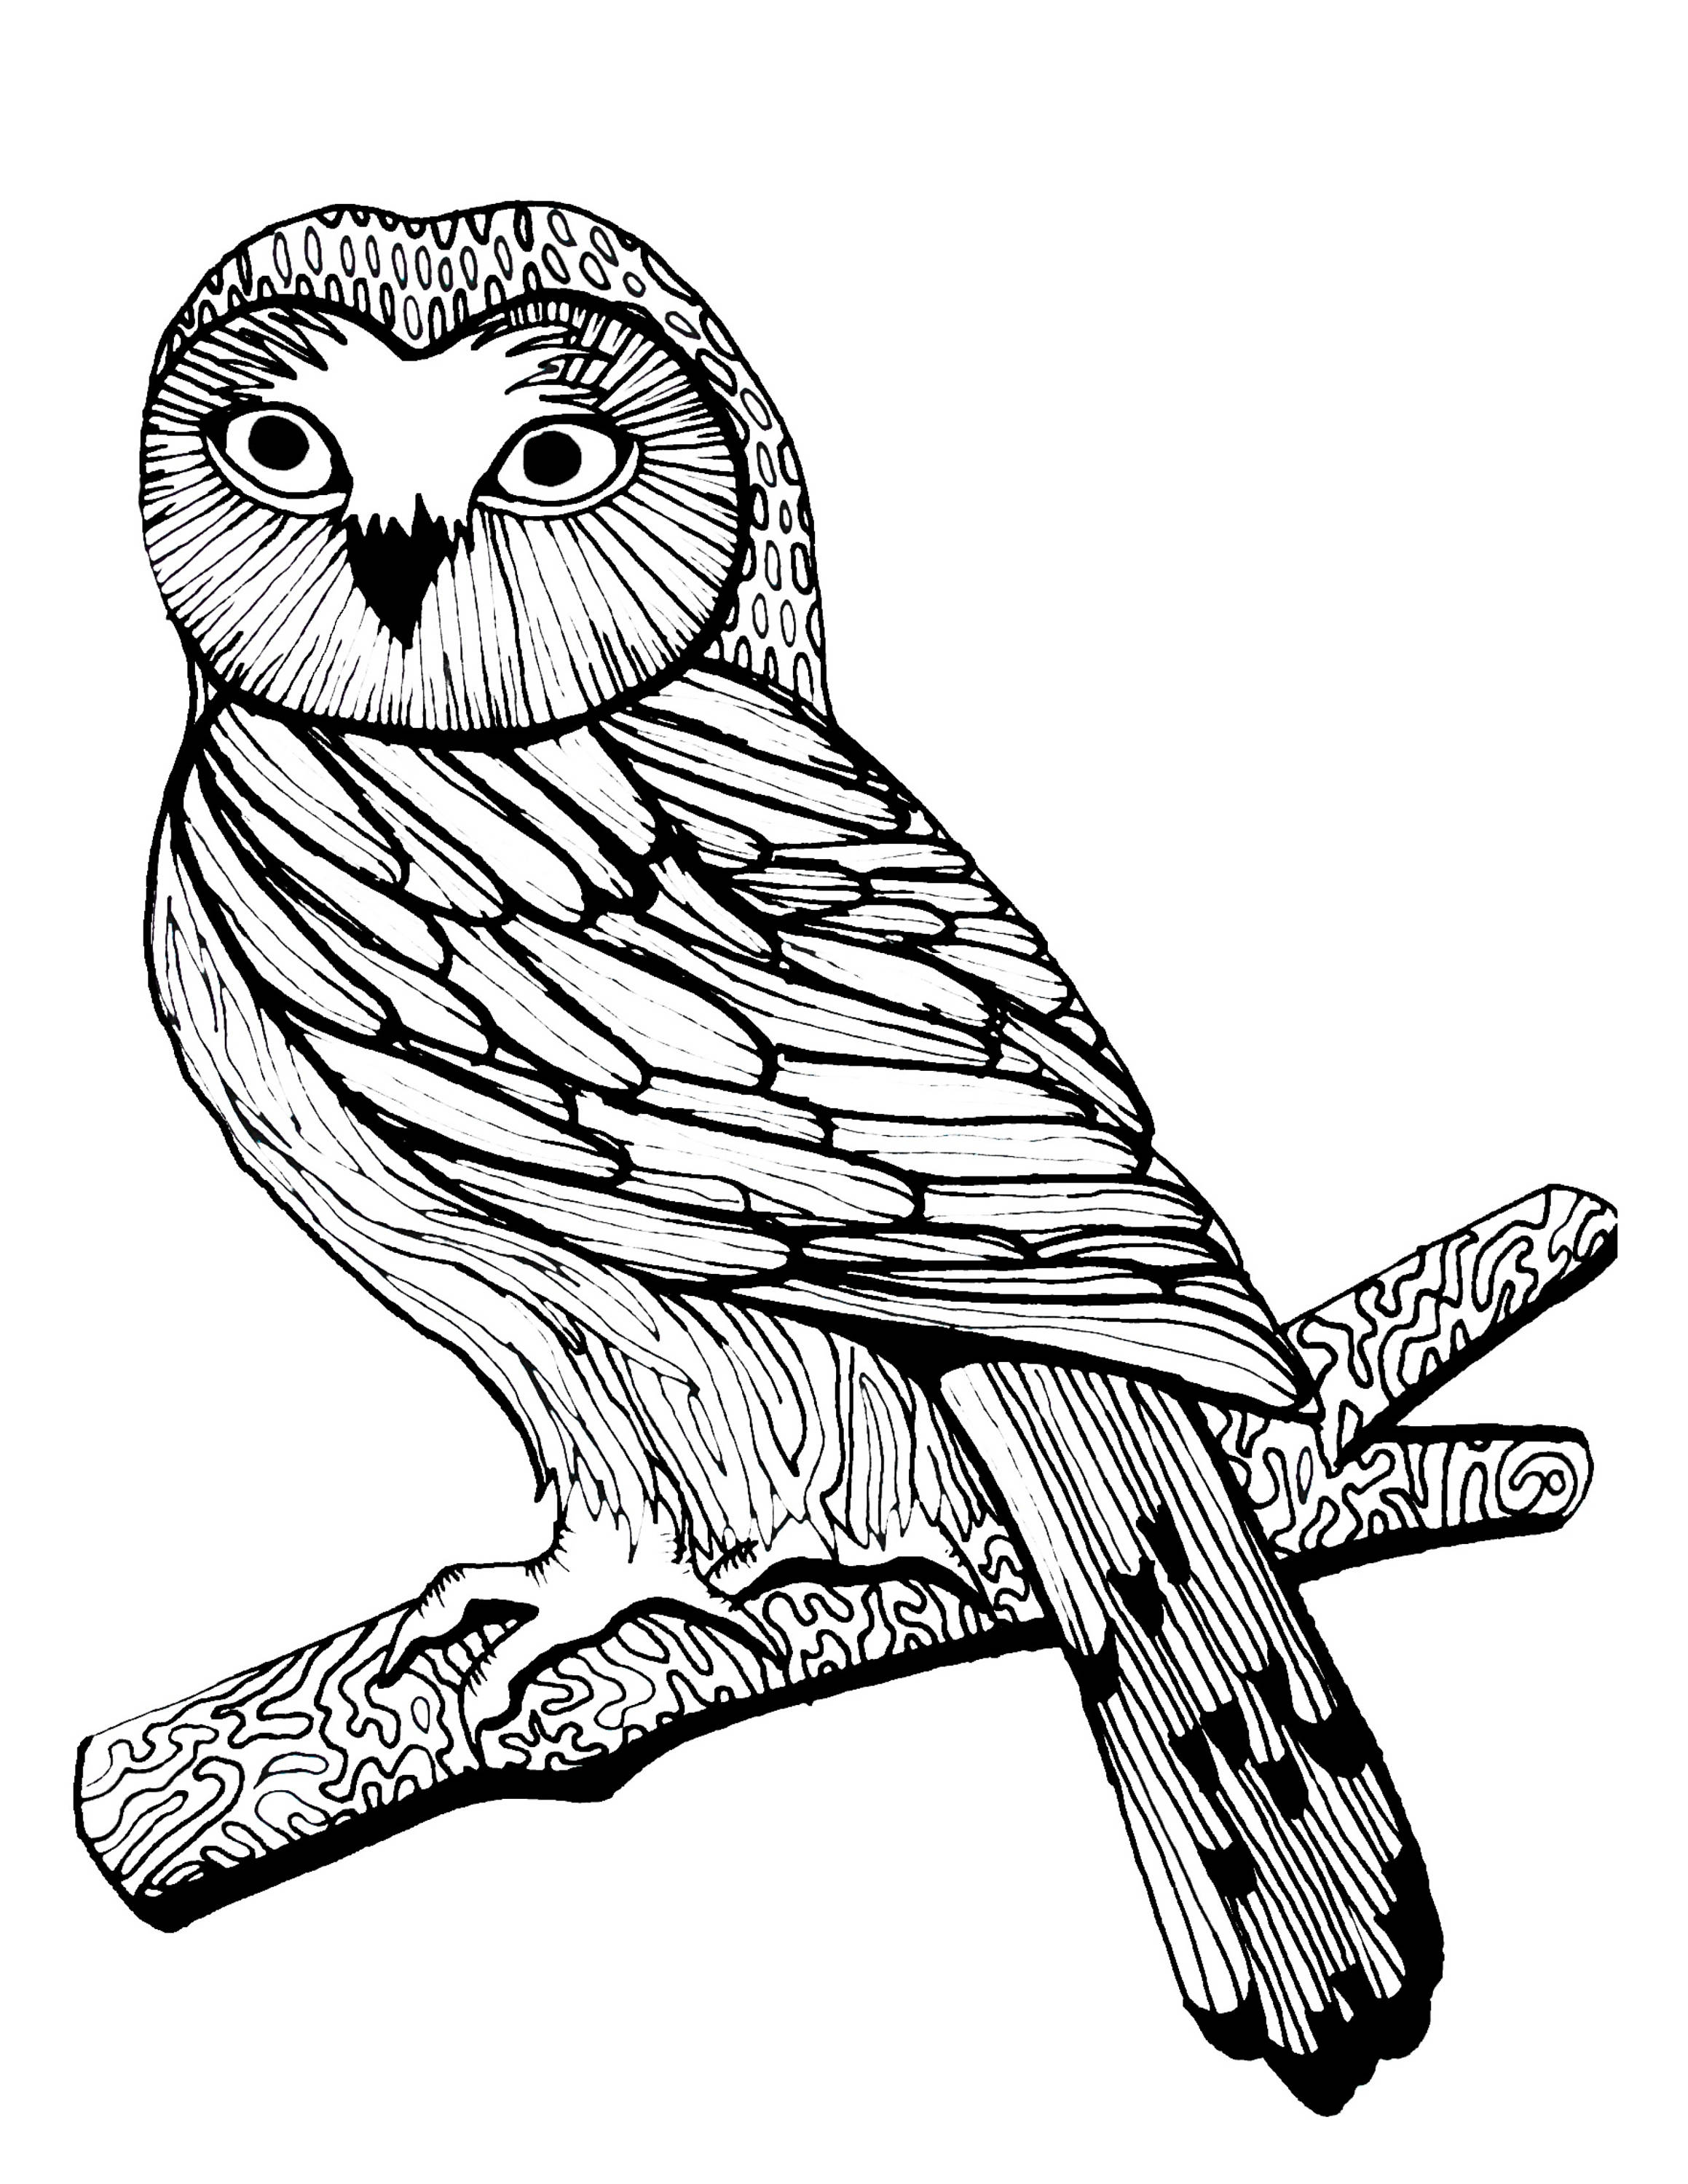 Download Adult coloring page woodland owl birds of prey owl